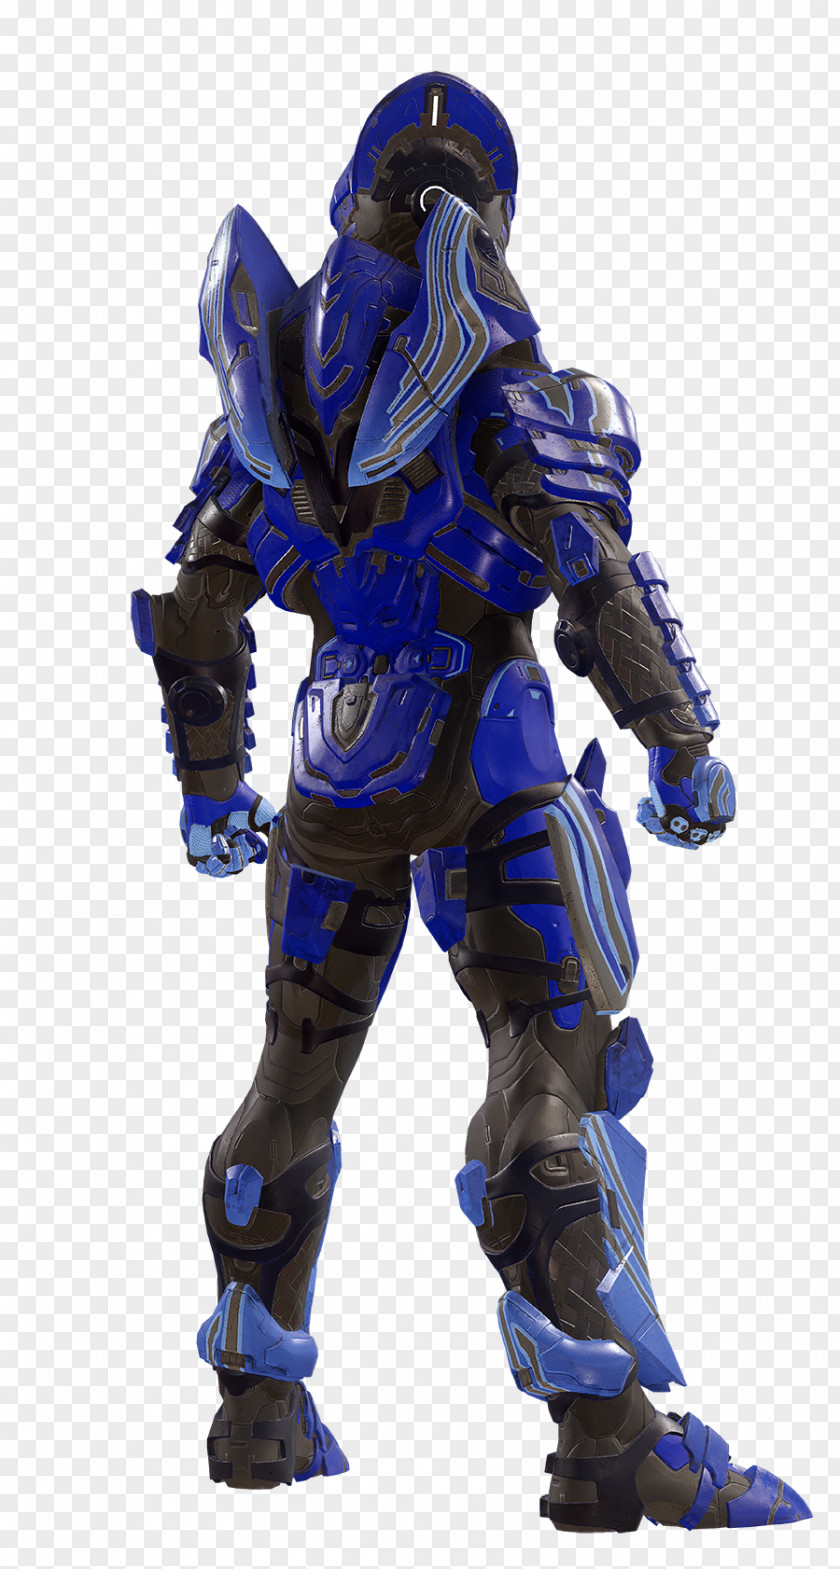 Glowing Halo 5: Guardians 4 Master Chief Video Game Spartan PNG